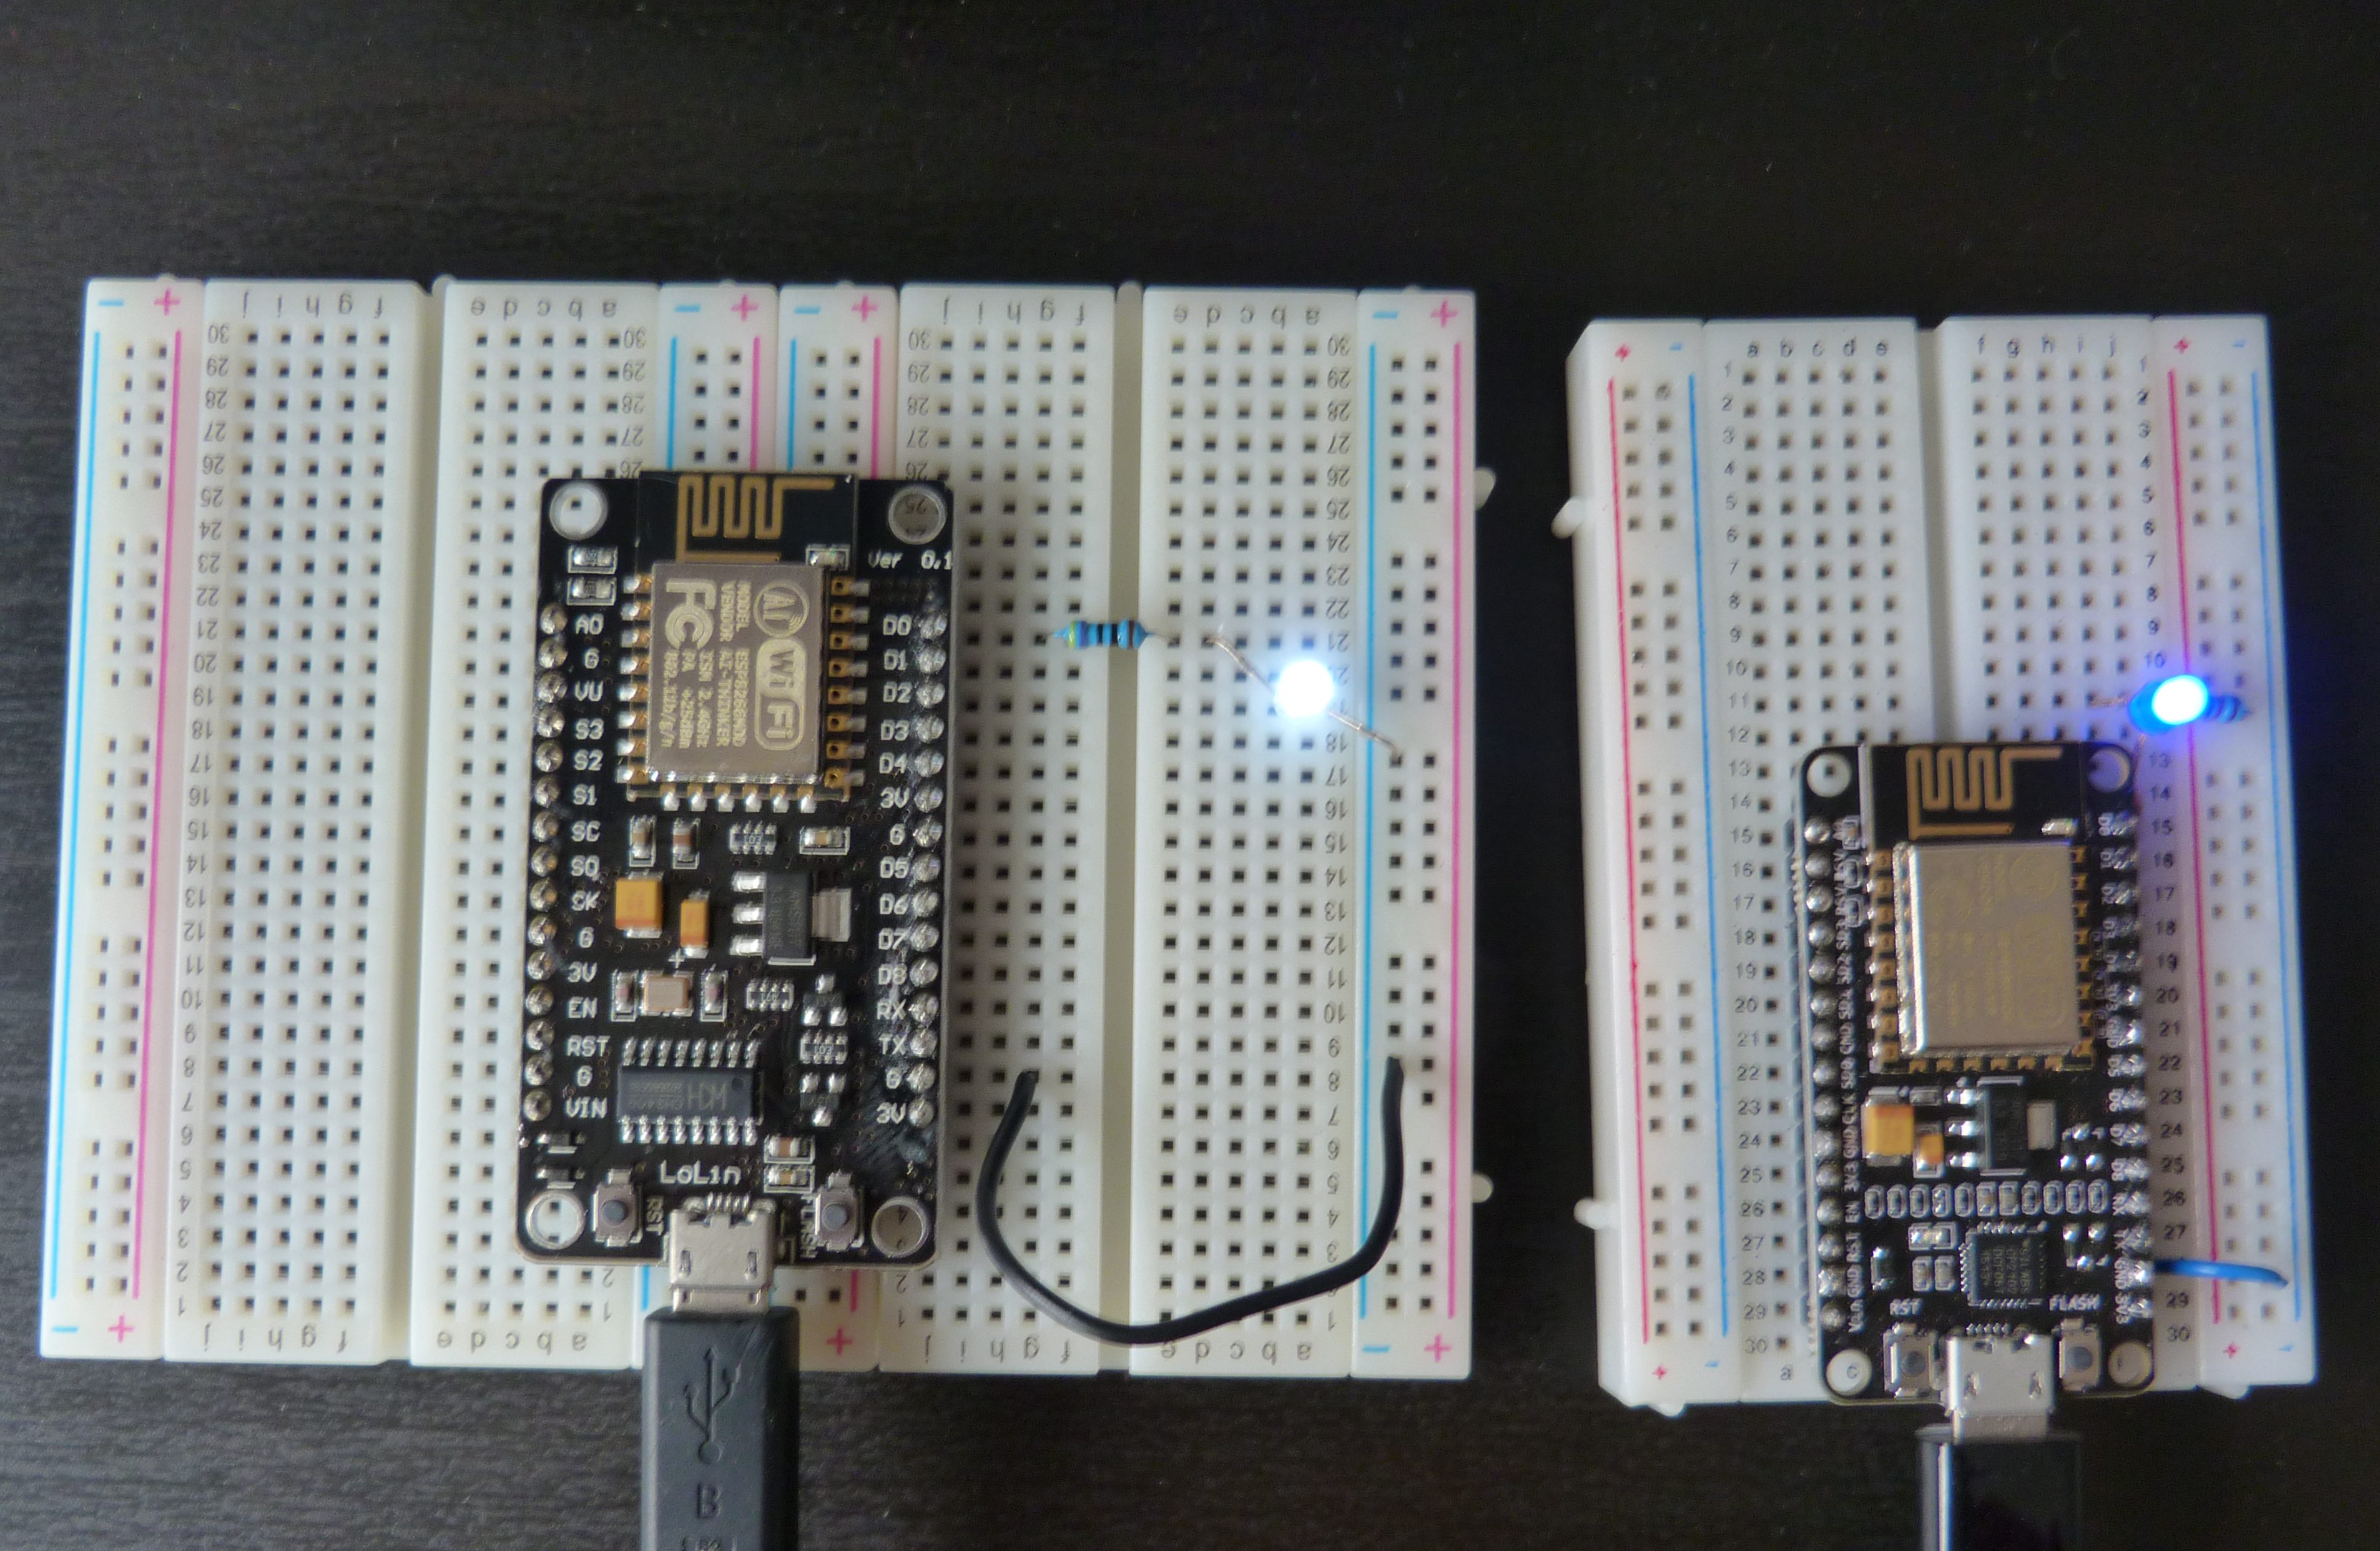 How to program the ESP8266 WiFi Modules with the Arduino IDE (Part 2 of 2)